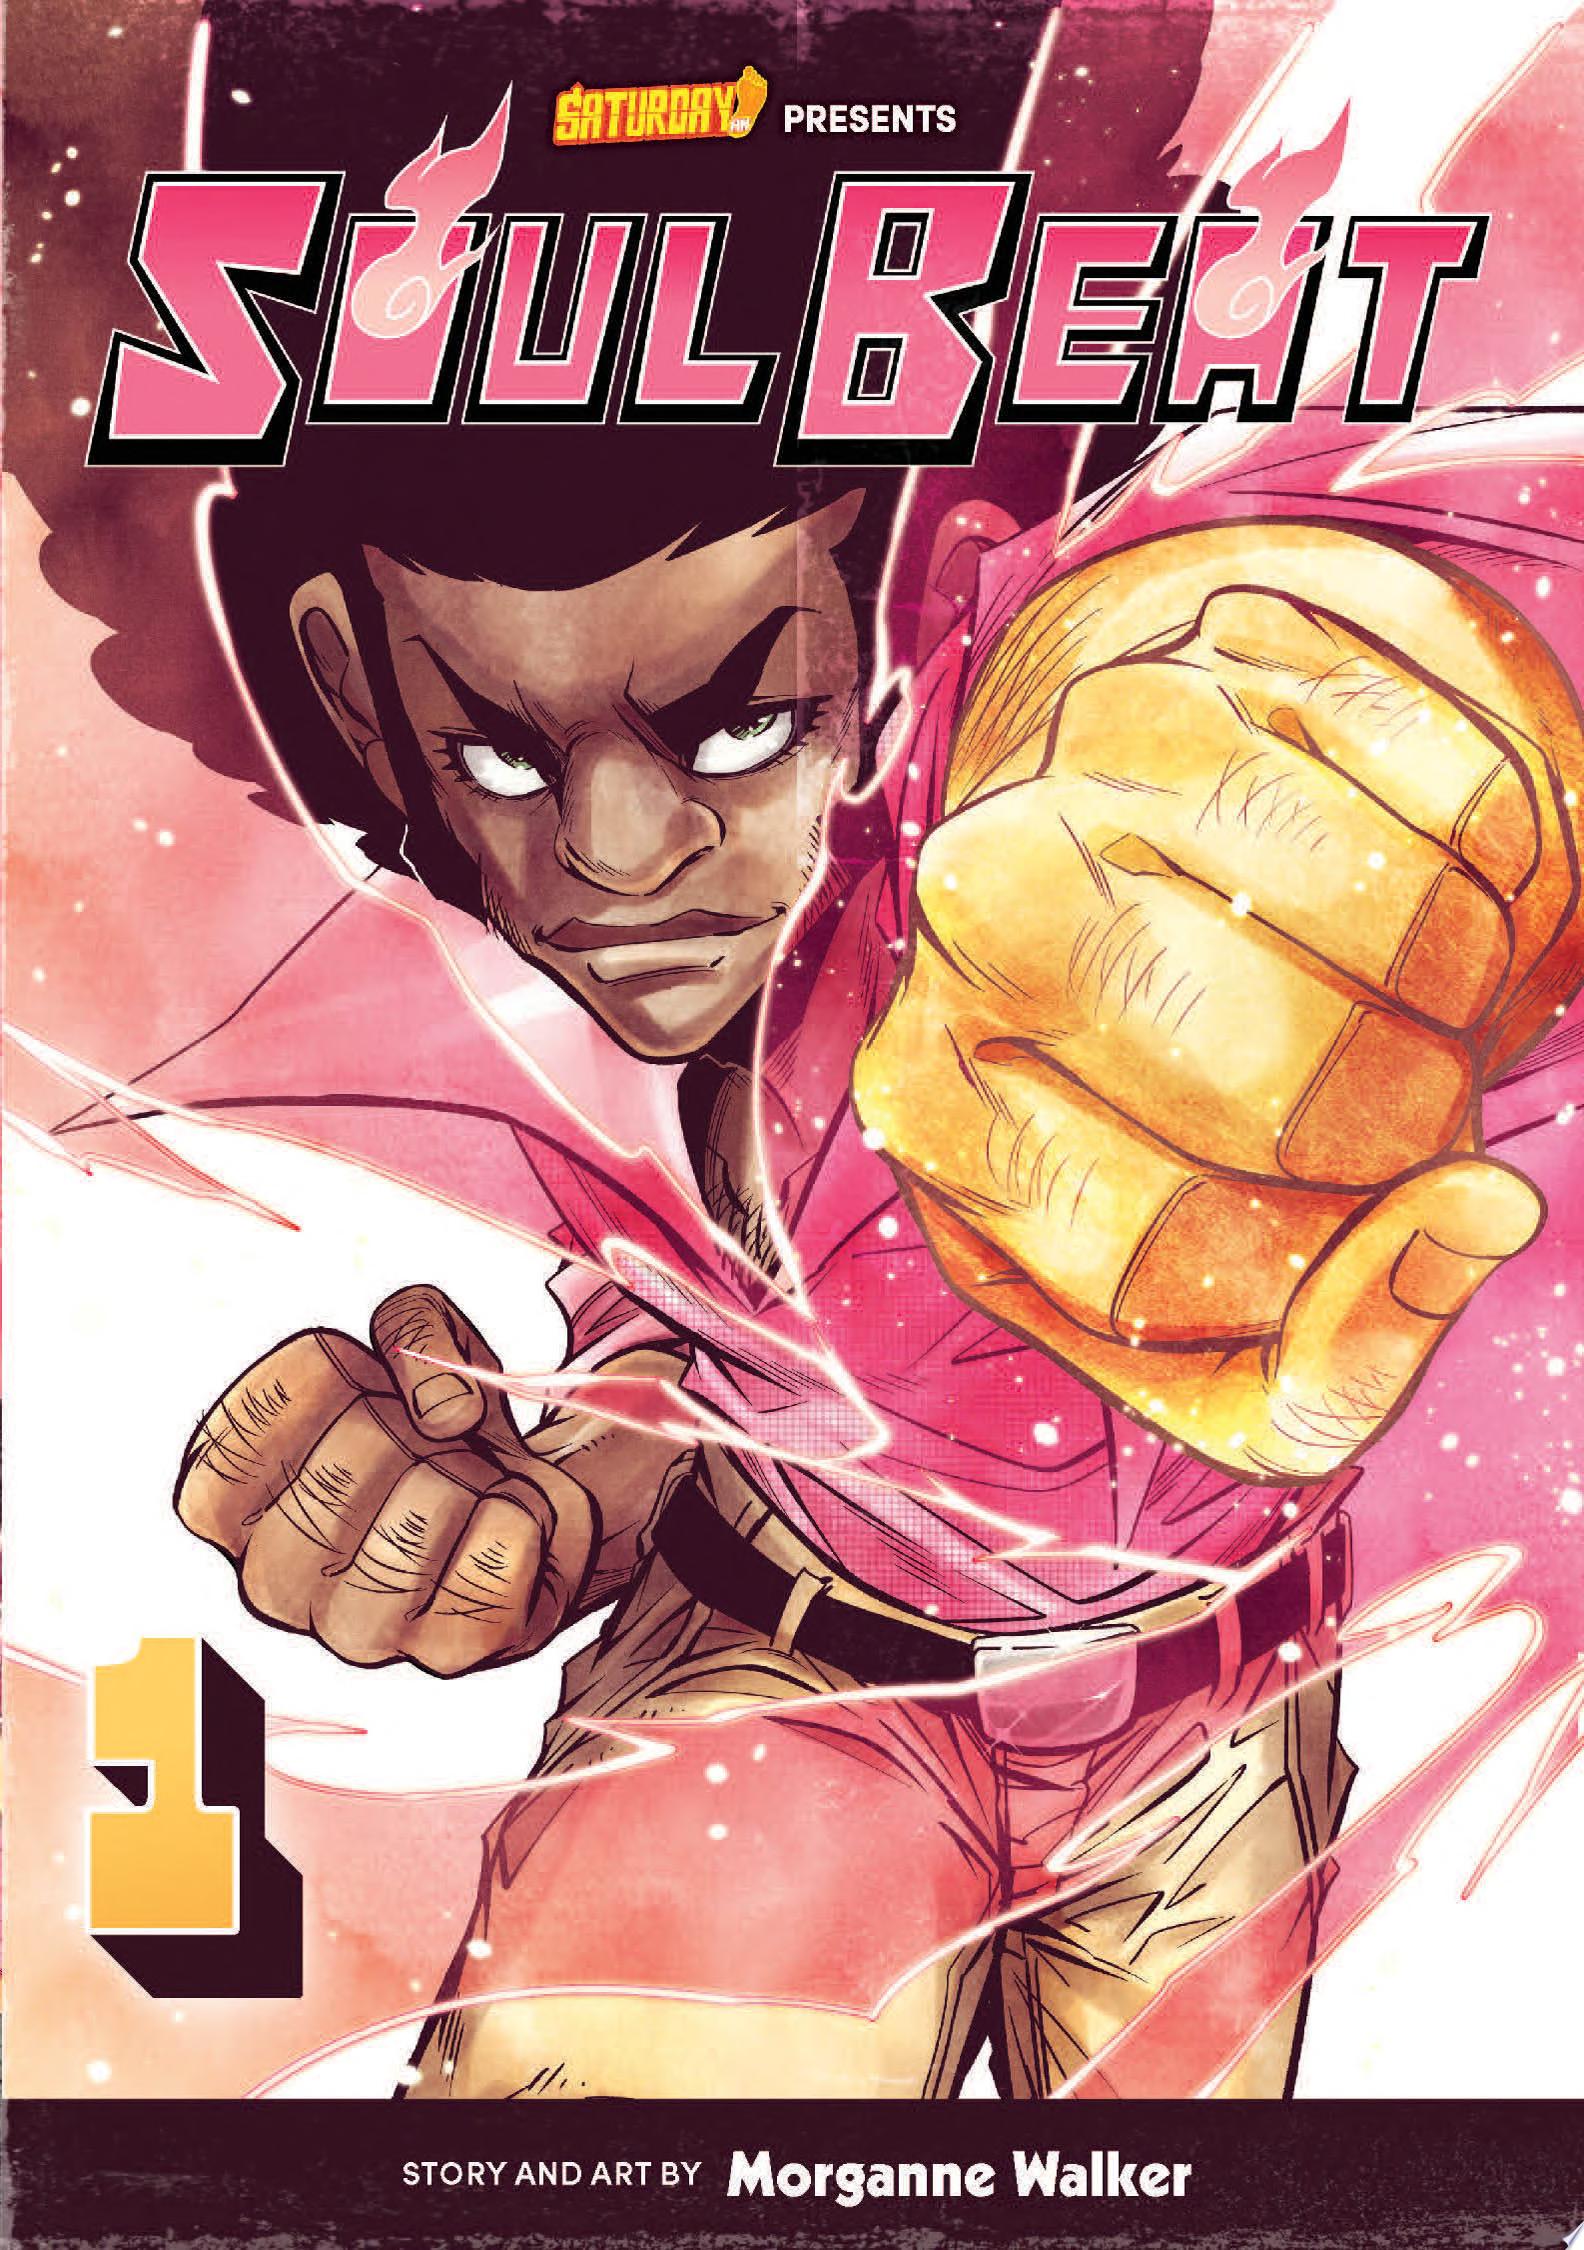 Image for "Soul Beat, Volume 1"